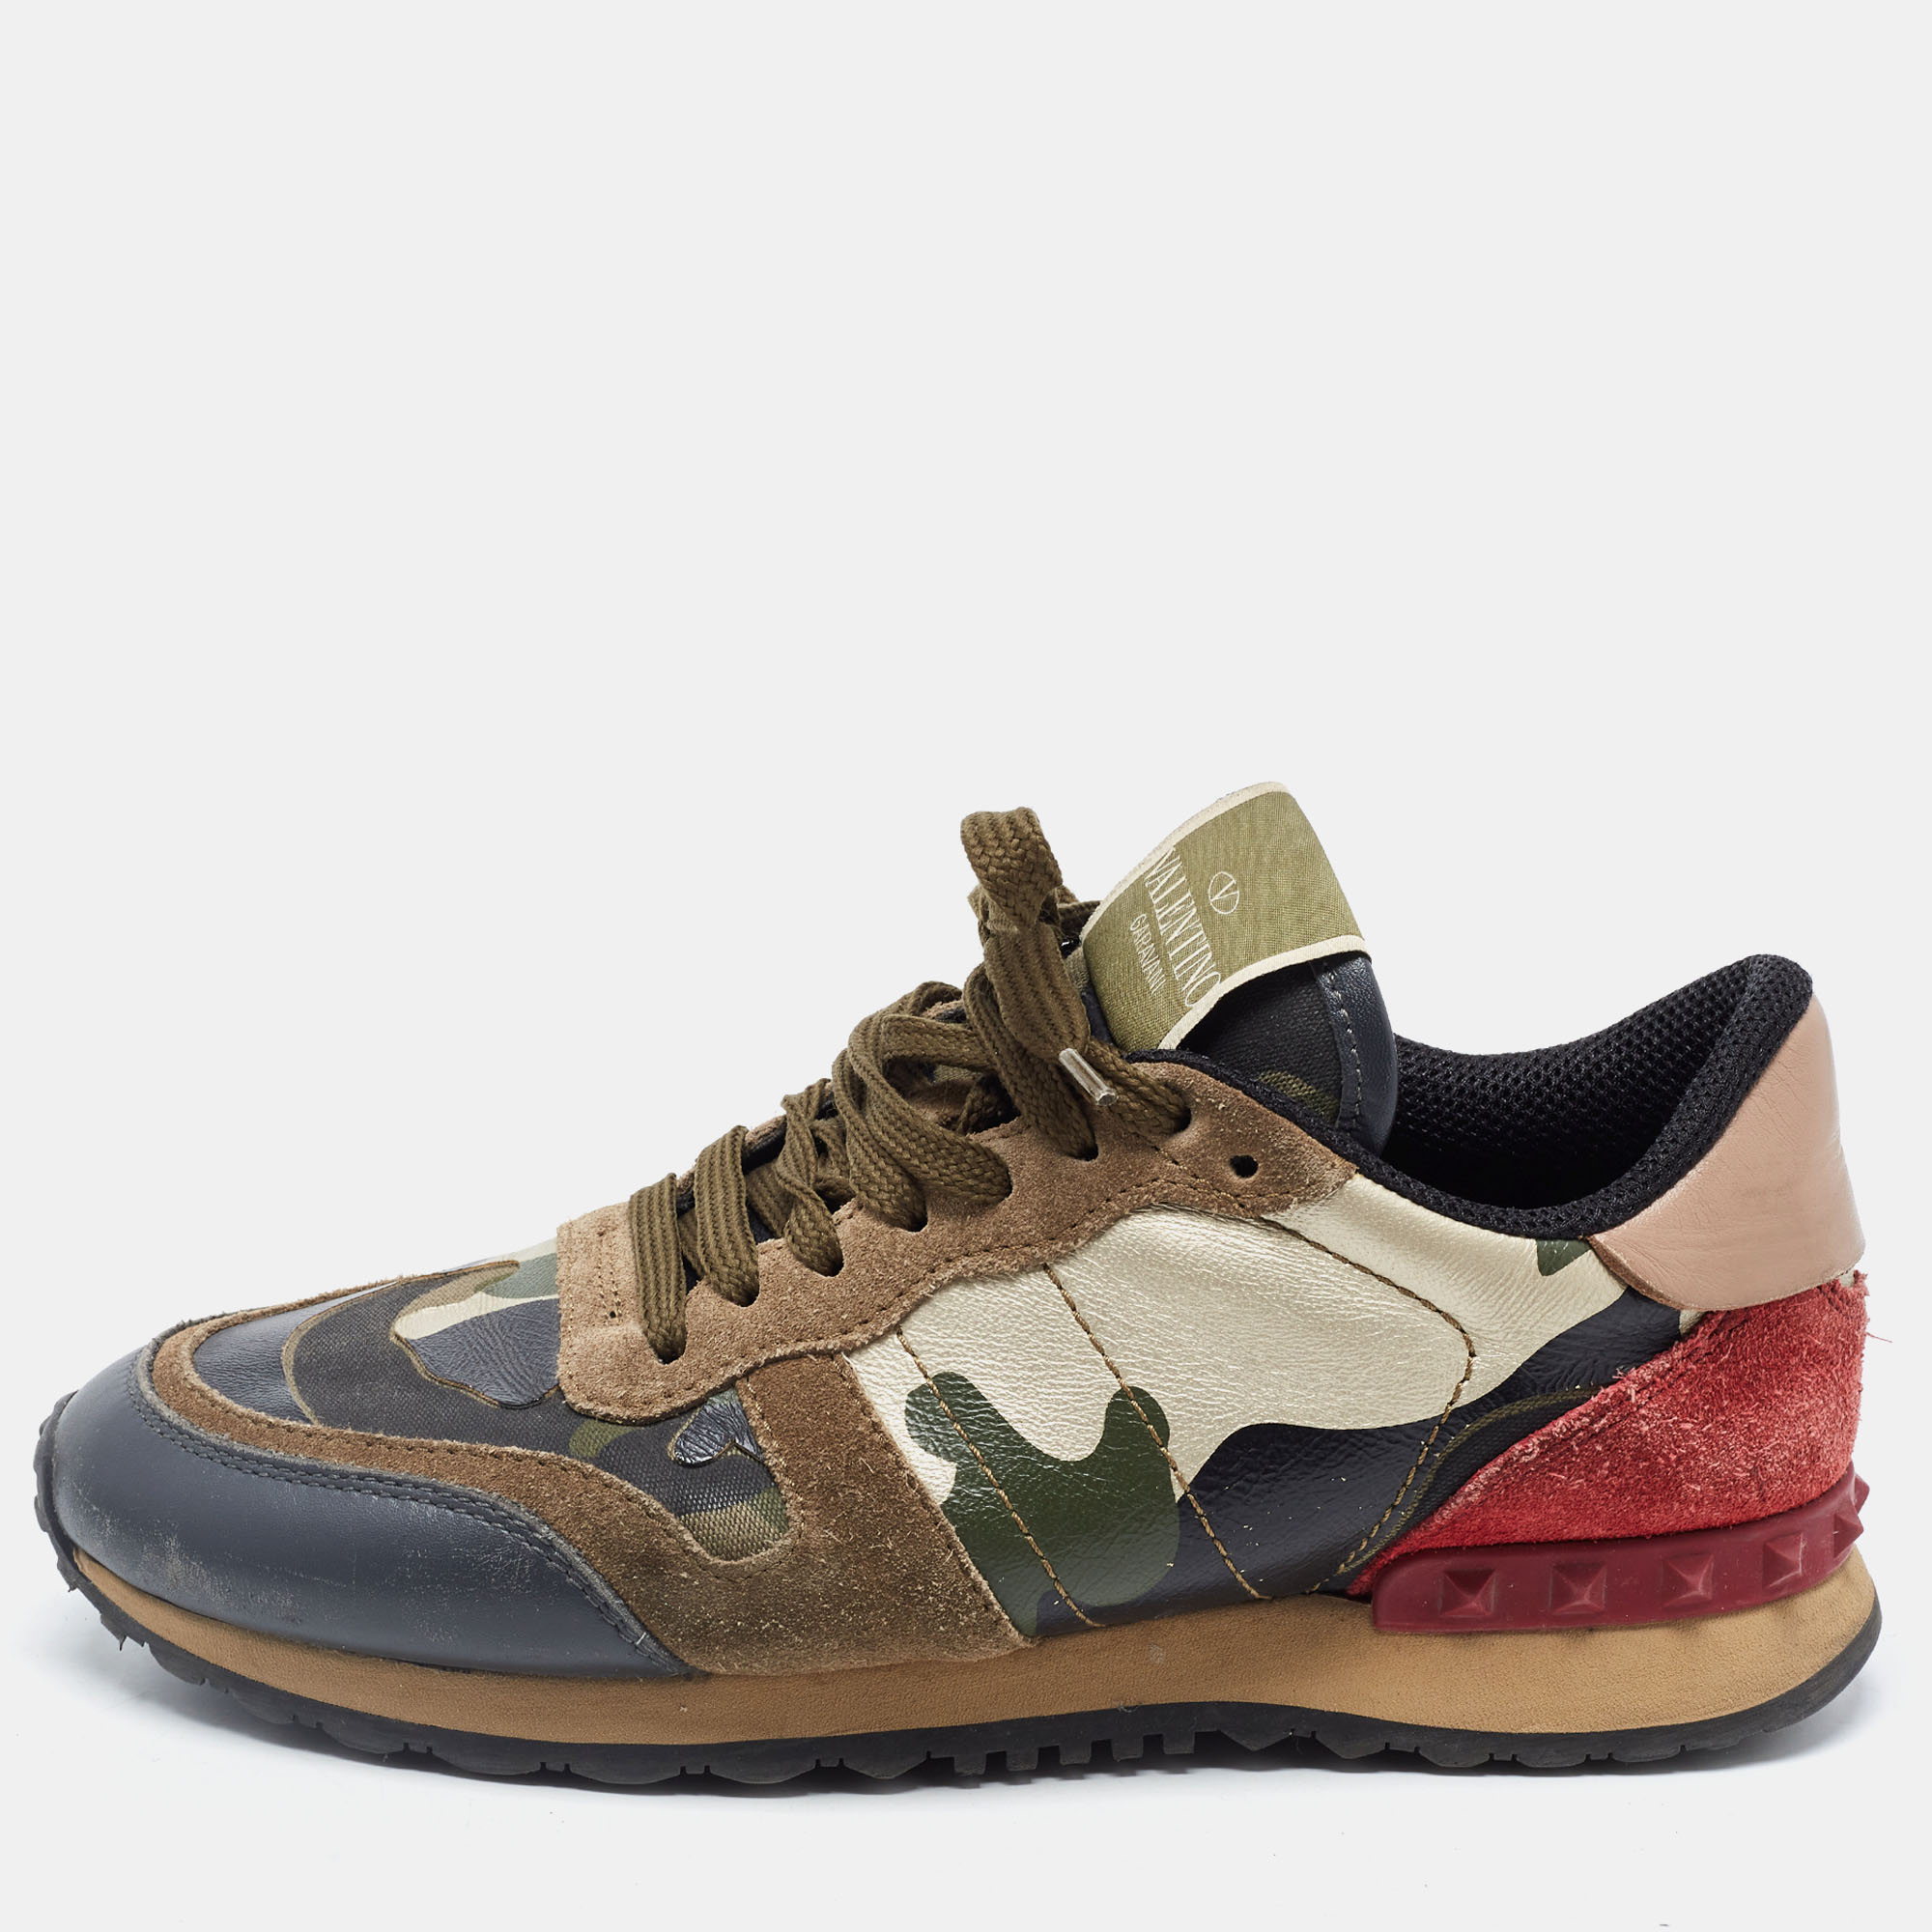 Valentinos Rockrunner sneaker is presented in camo print suede and leather with brand details and laces for easy securing. The shoes fit well and look great.